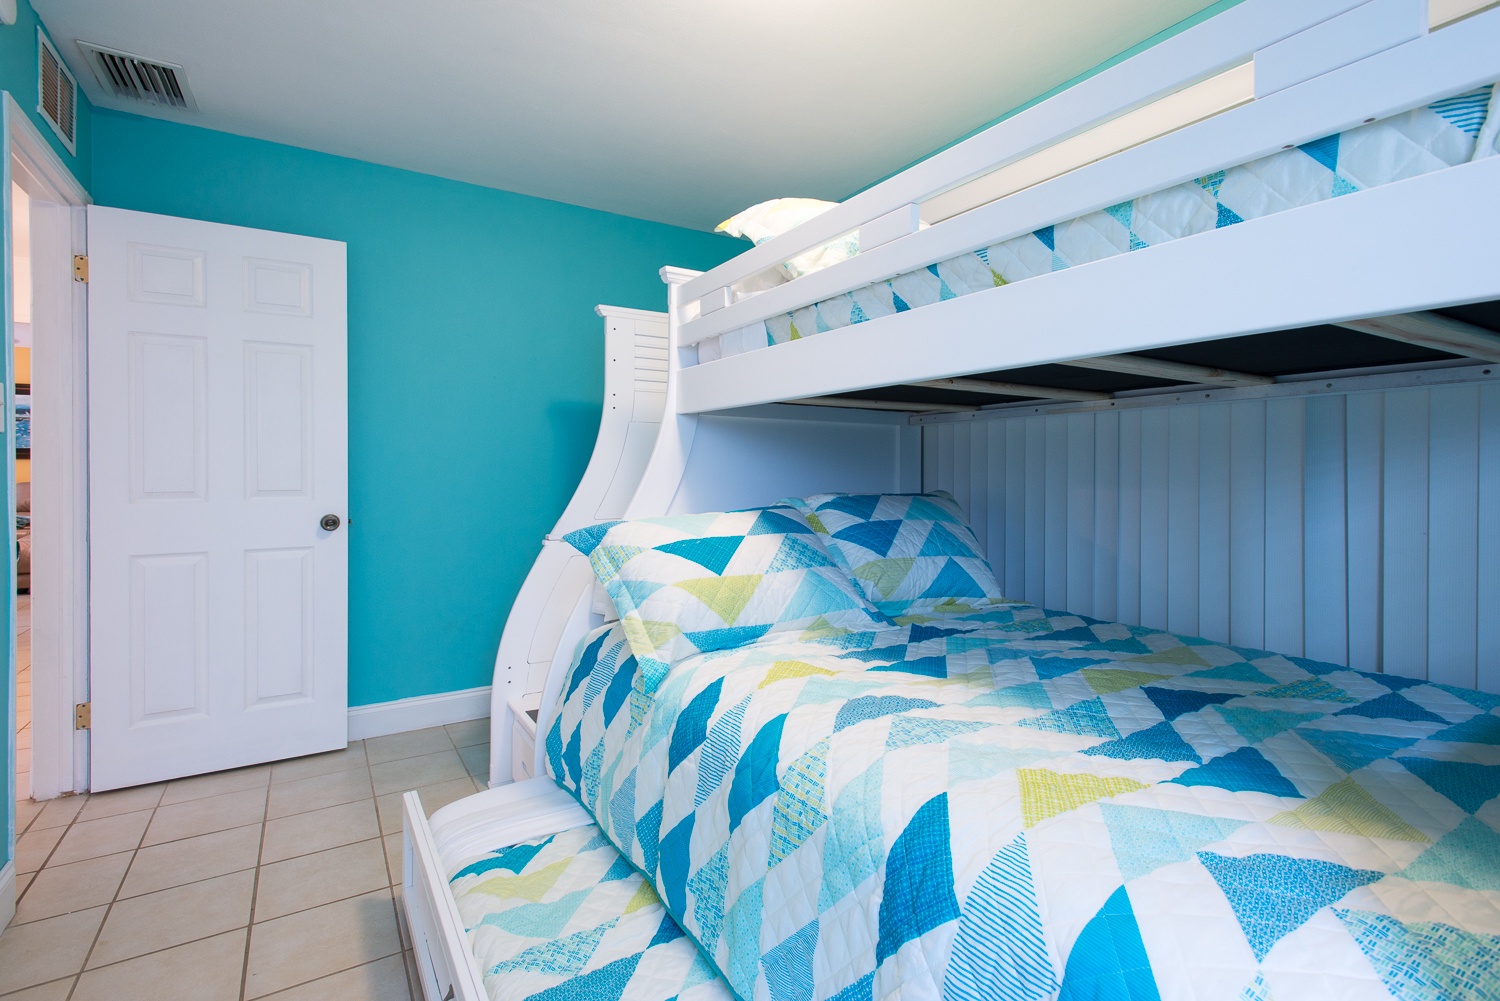 This bedroom has a full, a twin bunk and a pull out twin trundle bed